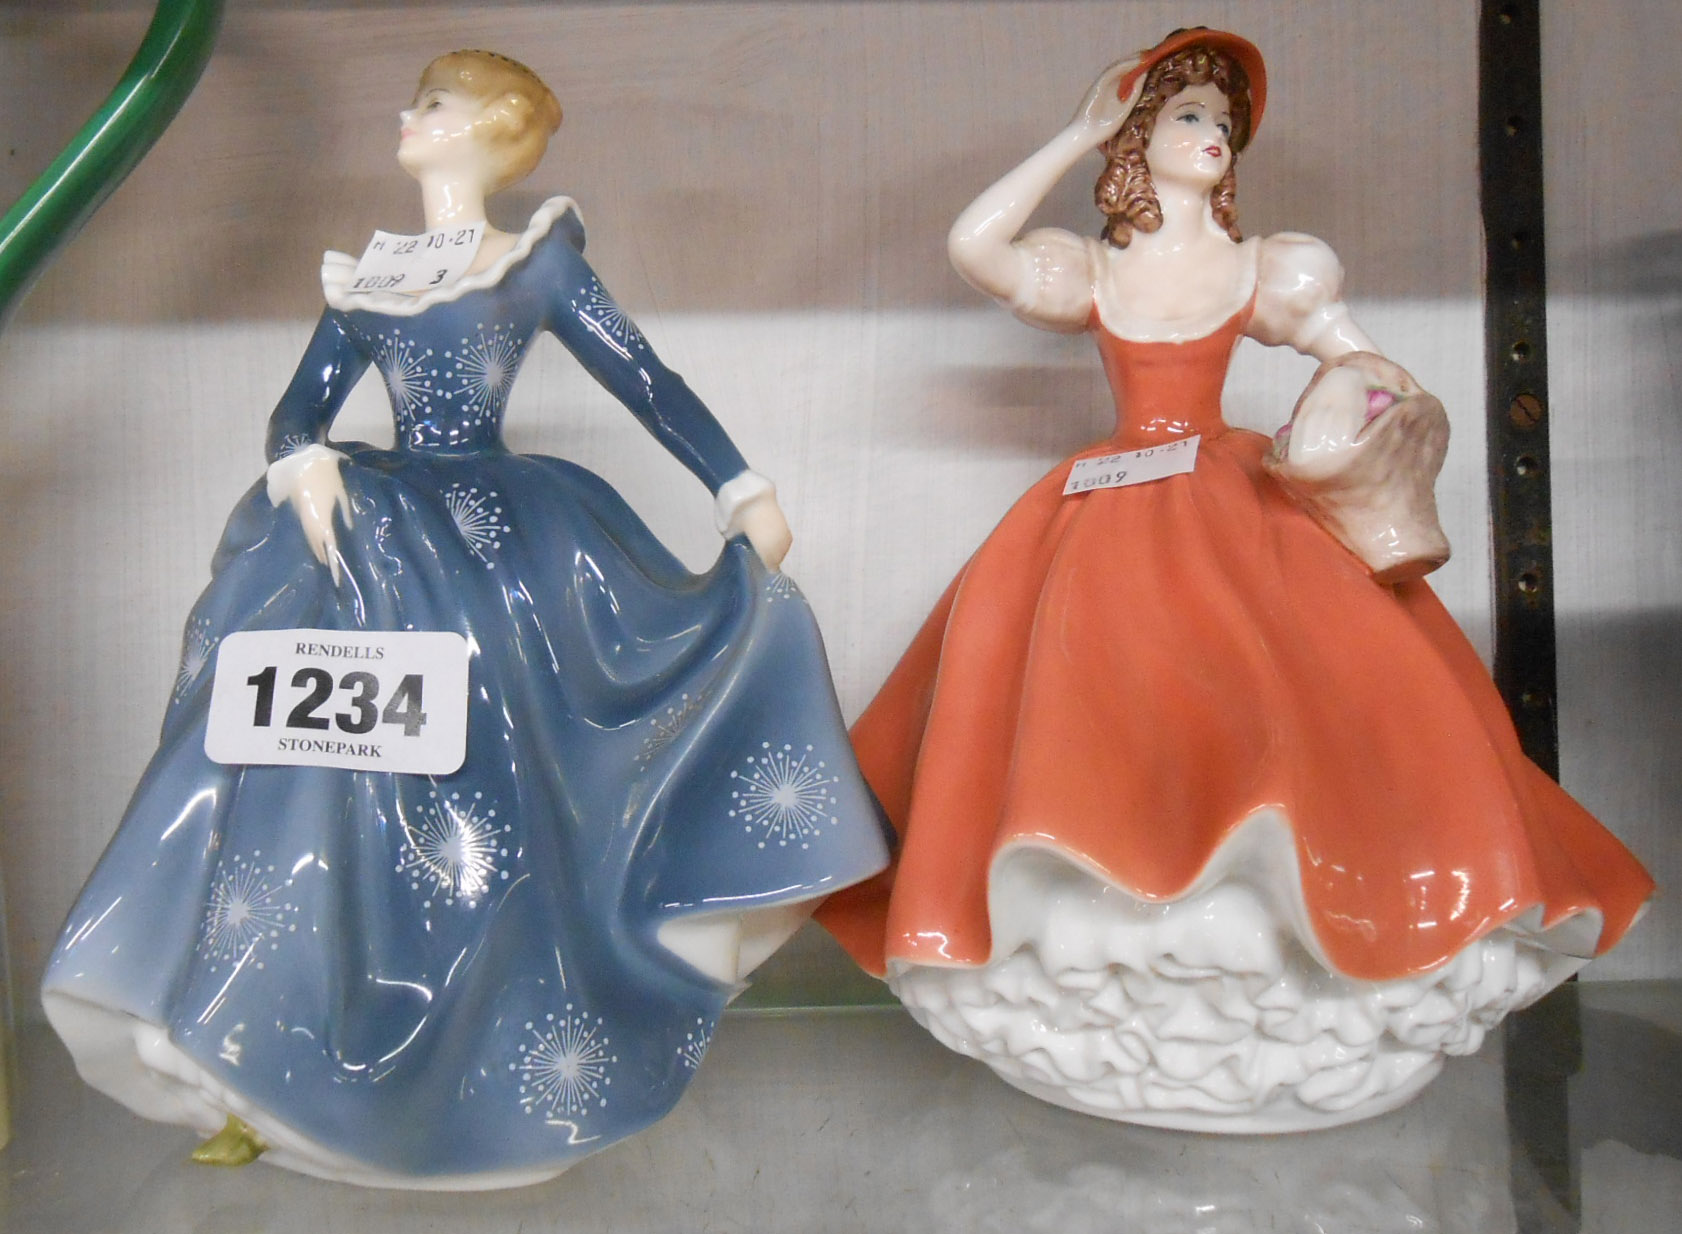 A Royal Doulton figurine Fragrance HN2334 - sold with a Coalport Ladies of Fashion figurine Flora